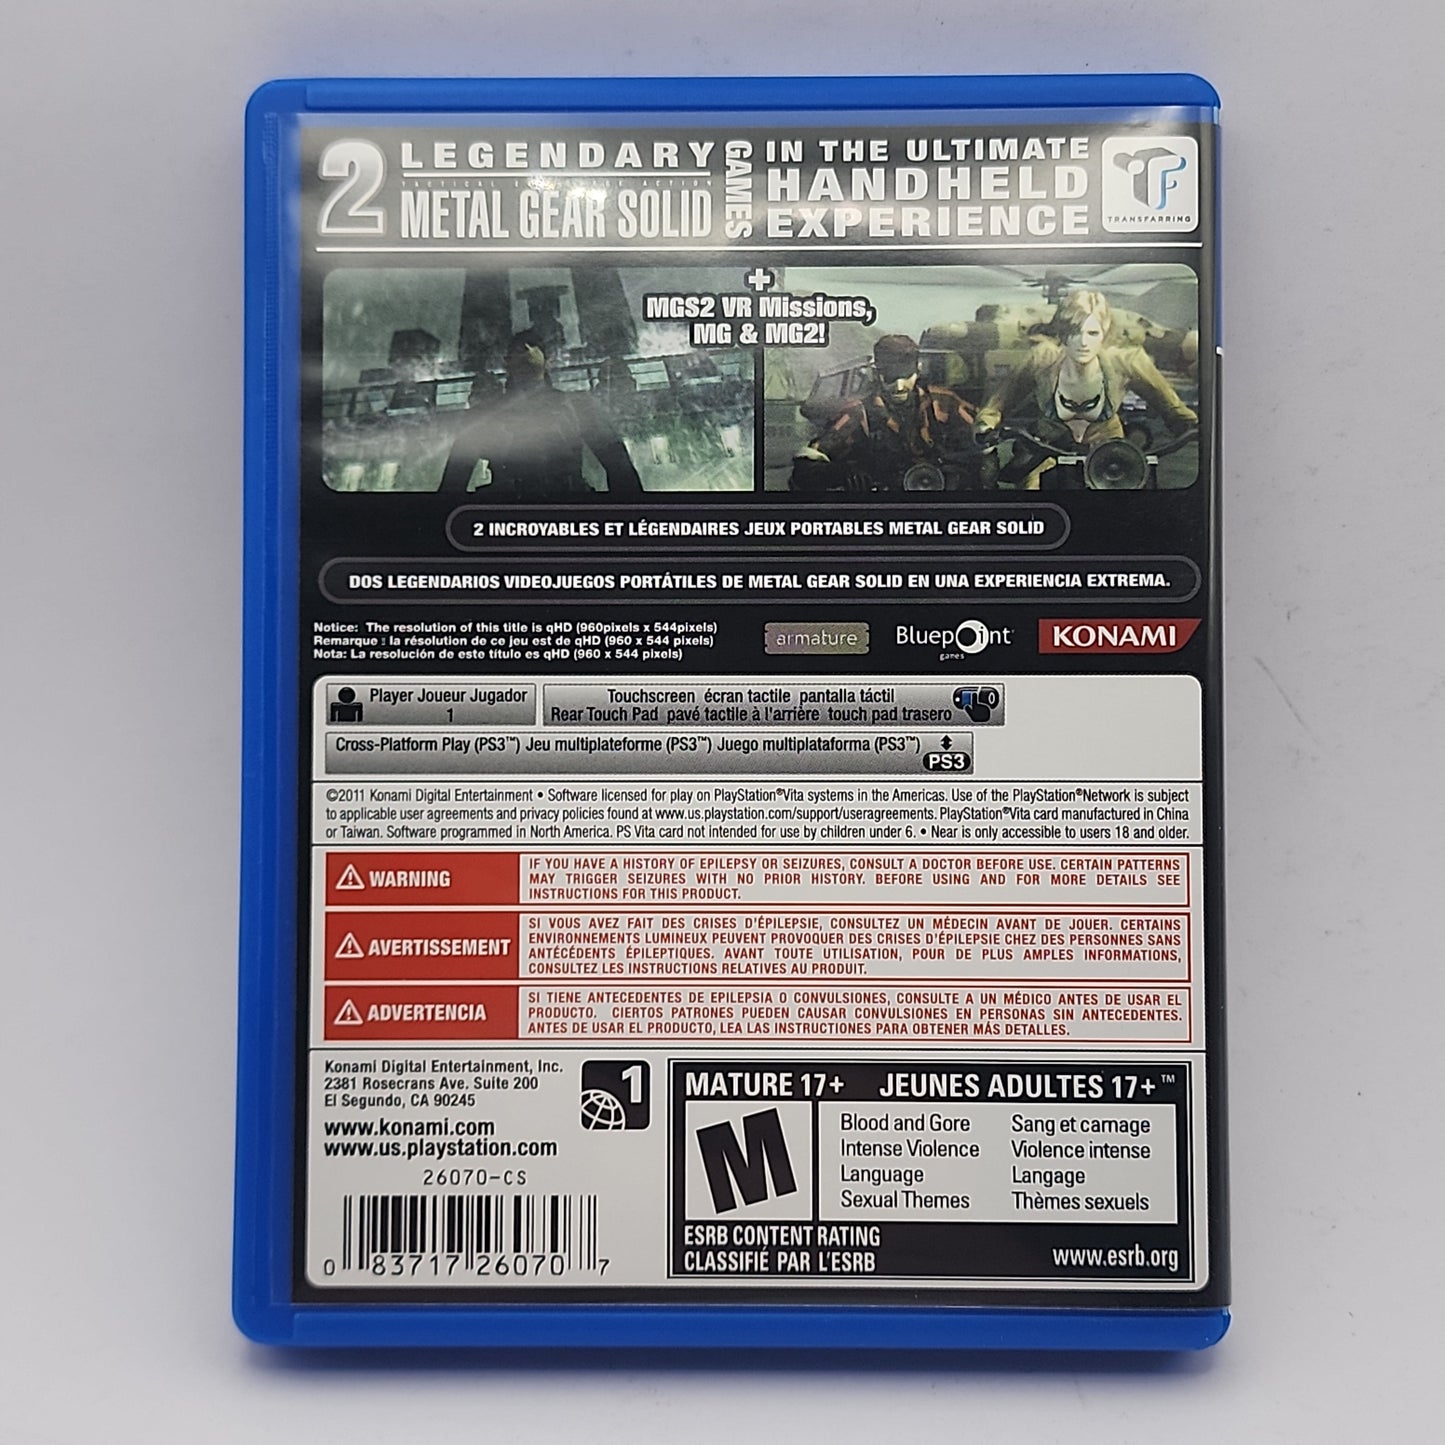 Playstation Vita - Metal Gear Solid HD Collection Retrograde Collectibles Action, Armature Studio, CIB, Compilation, Hideo Kojima, Konami, M Rated, Metal Gear Solid, MGS, pla Preowned Video Game 